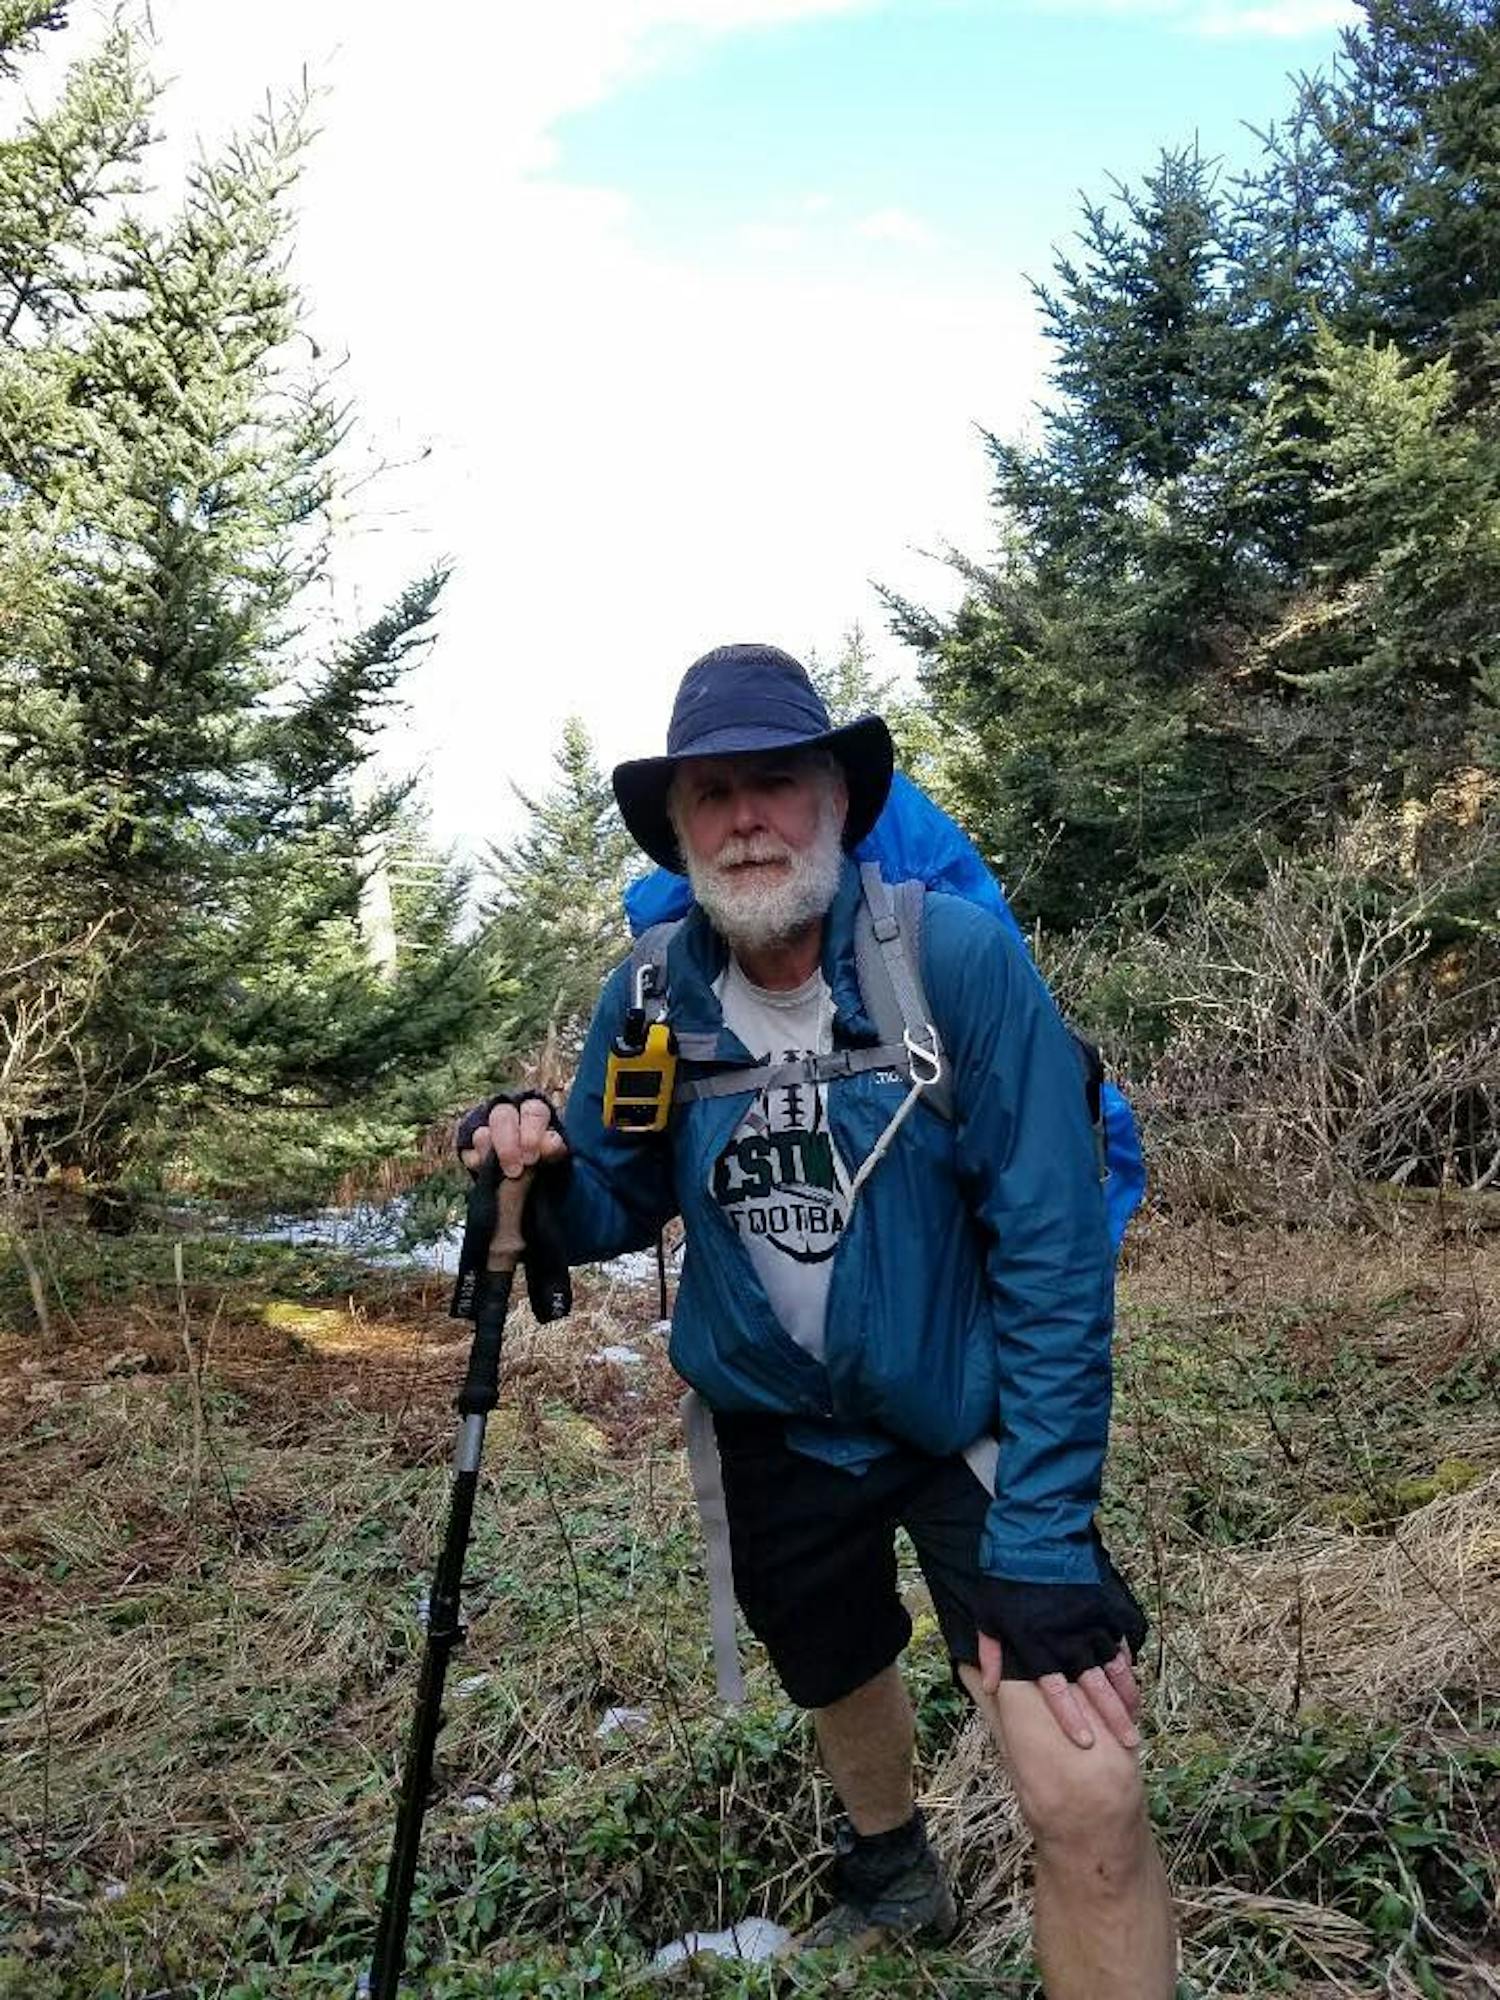 Donovan, 62, a retired UF professor, is enduring what could be an eight-month journey along the Appalachian Trail to raise money and awareness for the neurodegenerative disease Alzheimer’s.